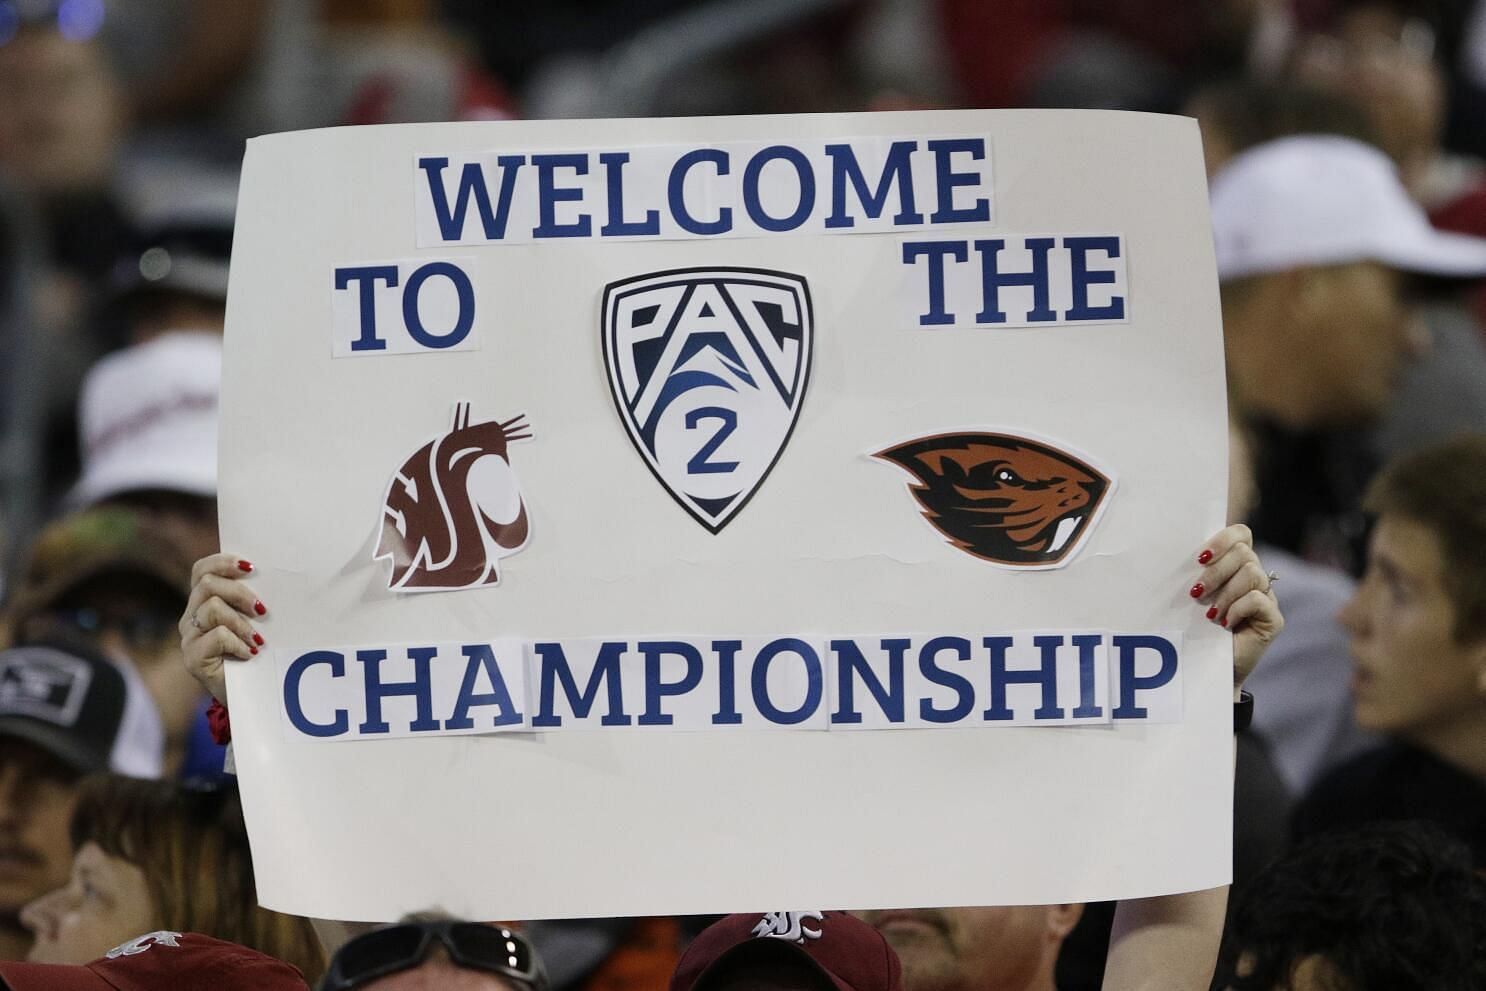 The Pac-12 expansion will be critical for the College Football Playoff